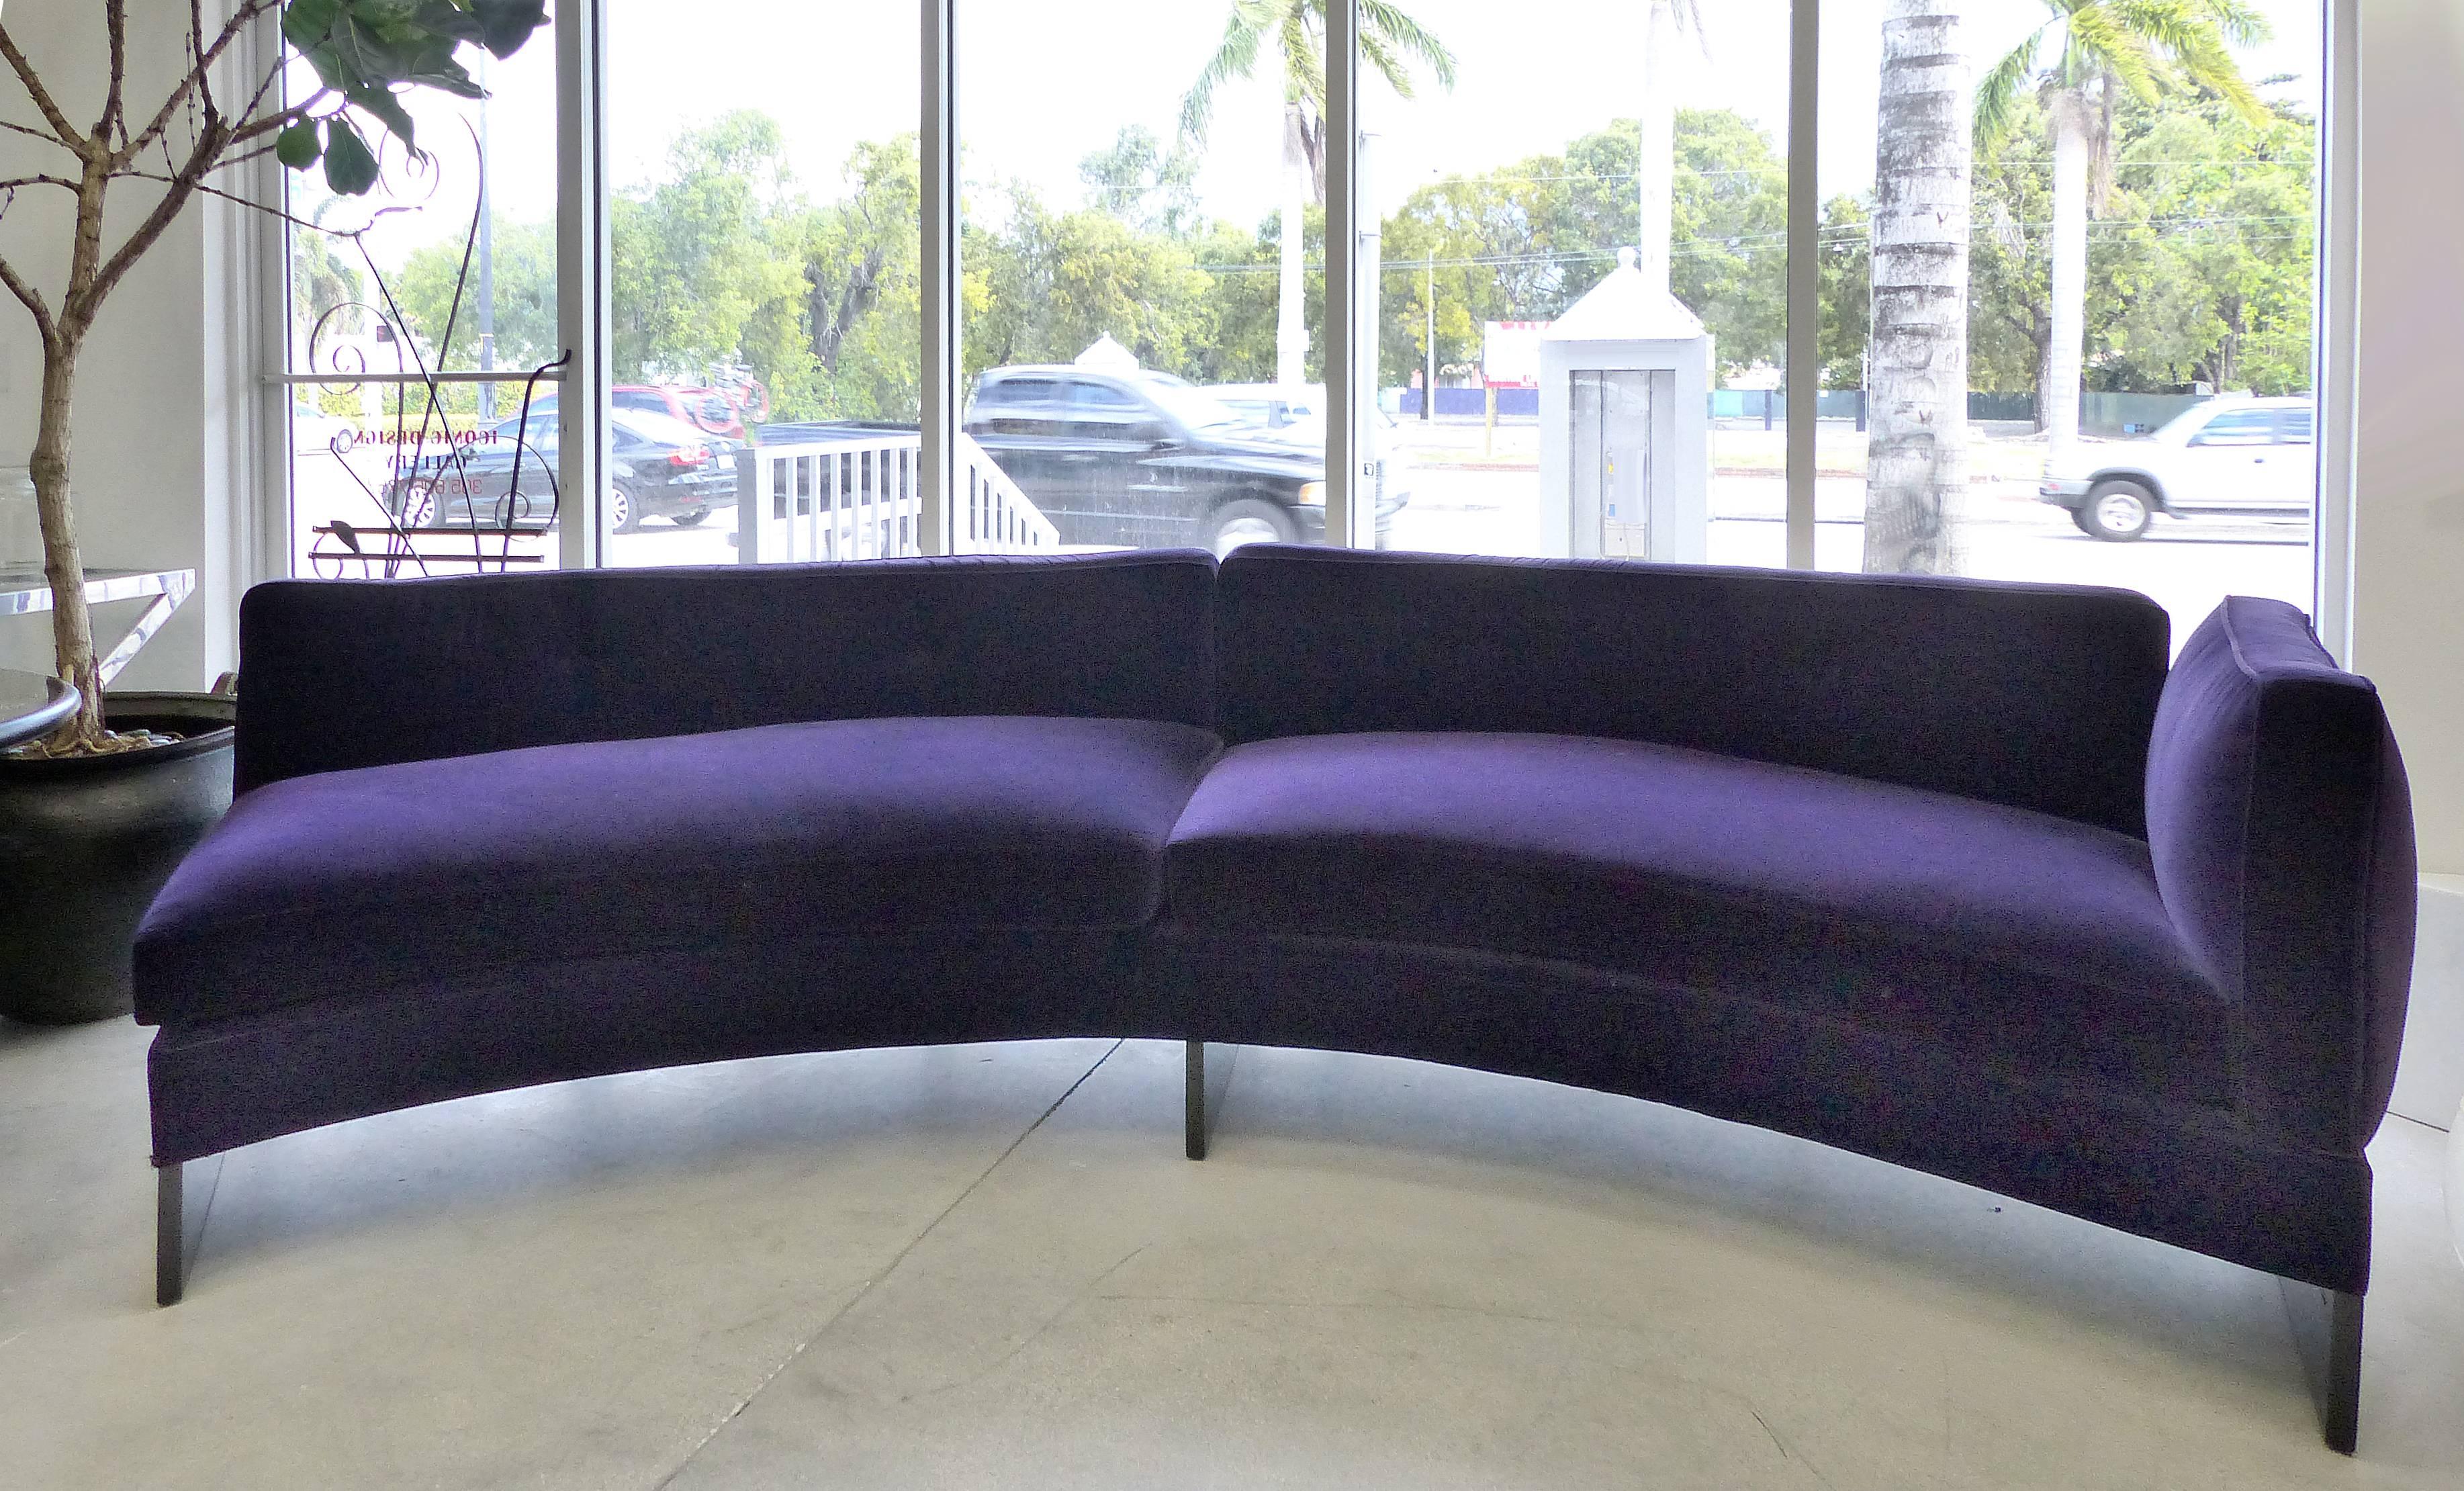 Offered for sale is an 11 foot long custom designed curved sofa in violet velvet which was commissioned by the previous owner from a NYC designer for a second home on Pine Tree Drive in Miami Beach. The sofa has one arm and is open on the opposite